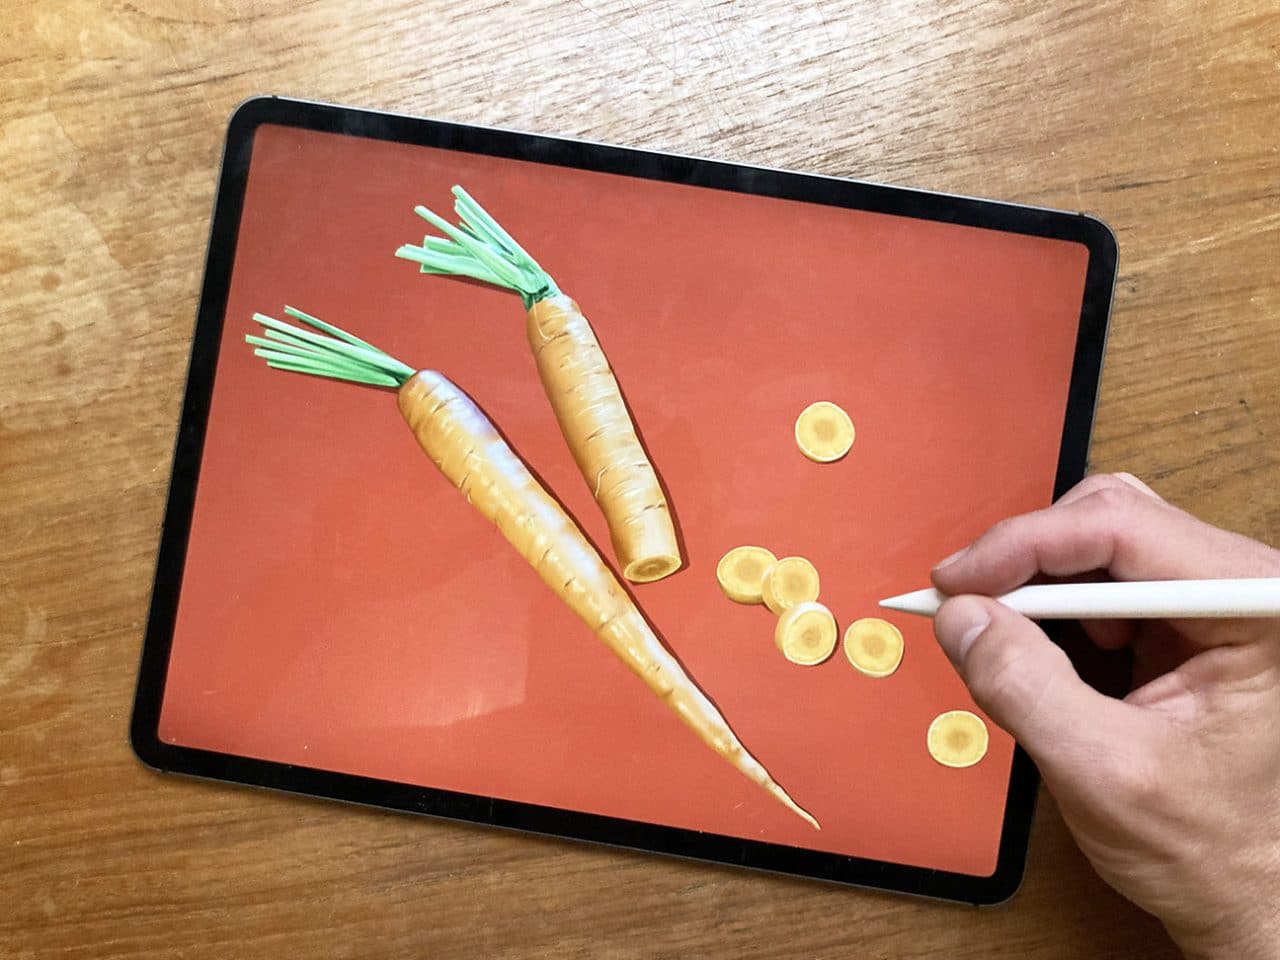 Learn the process of creating a digital carrot drawing with Procreate on iPad Pro.